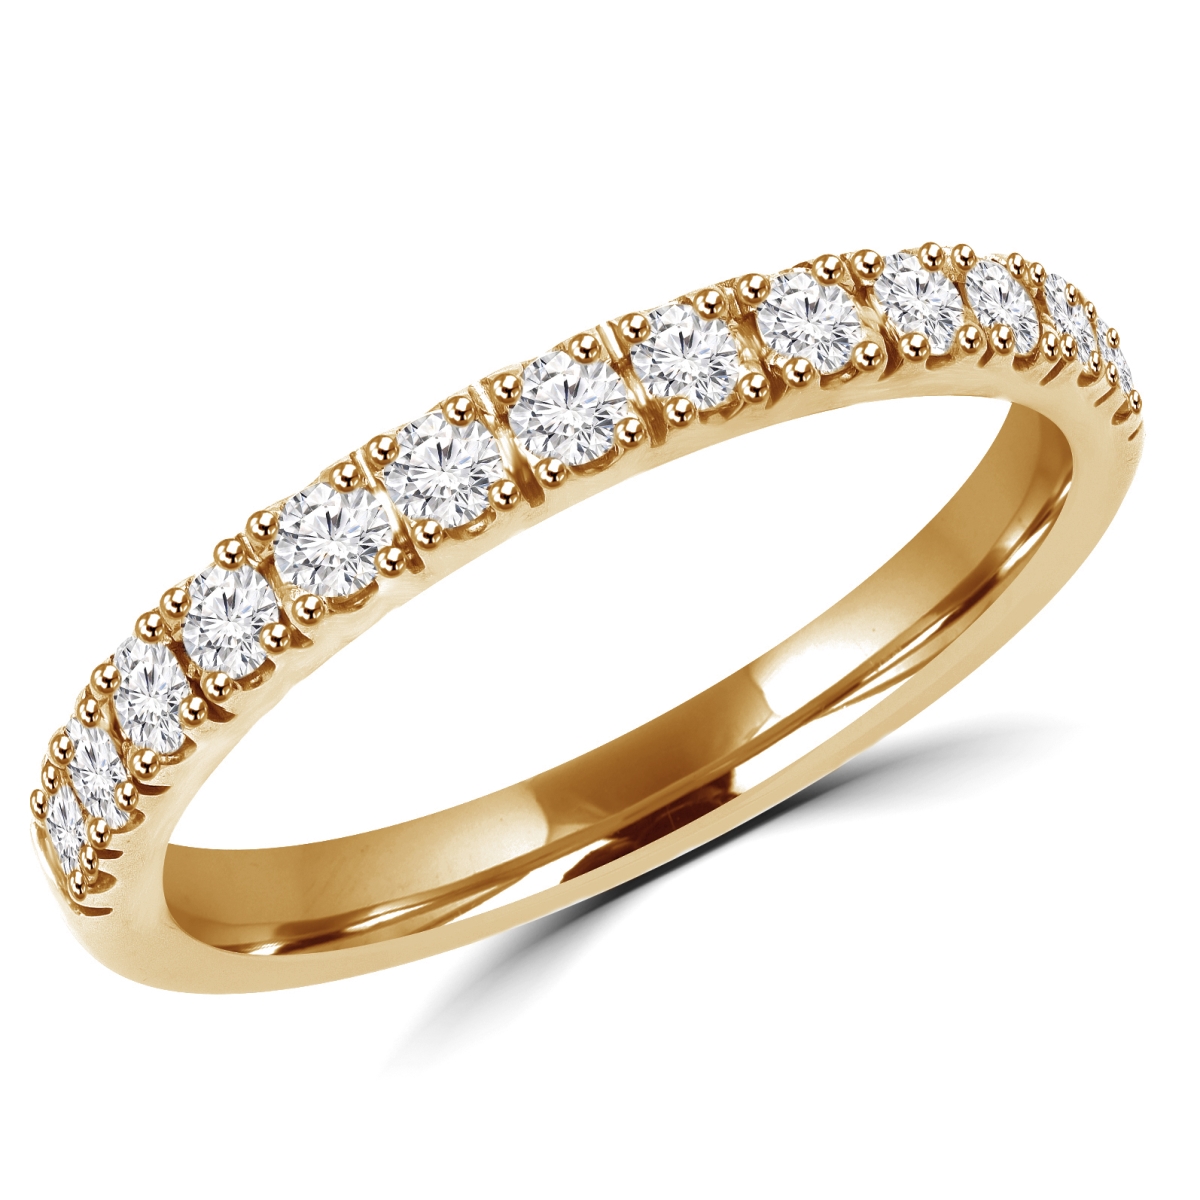 Picture of Majesty Diamonds MD180187-7 0.3 CTW Round Diamond Semi-Eternity Wedding Band Ring in 14K Yellow Gold - Size 7